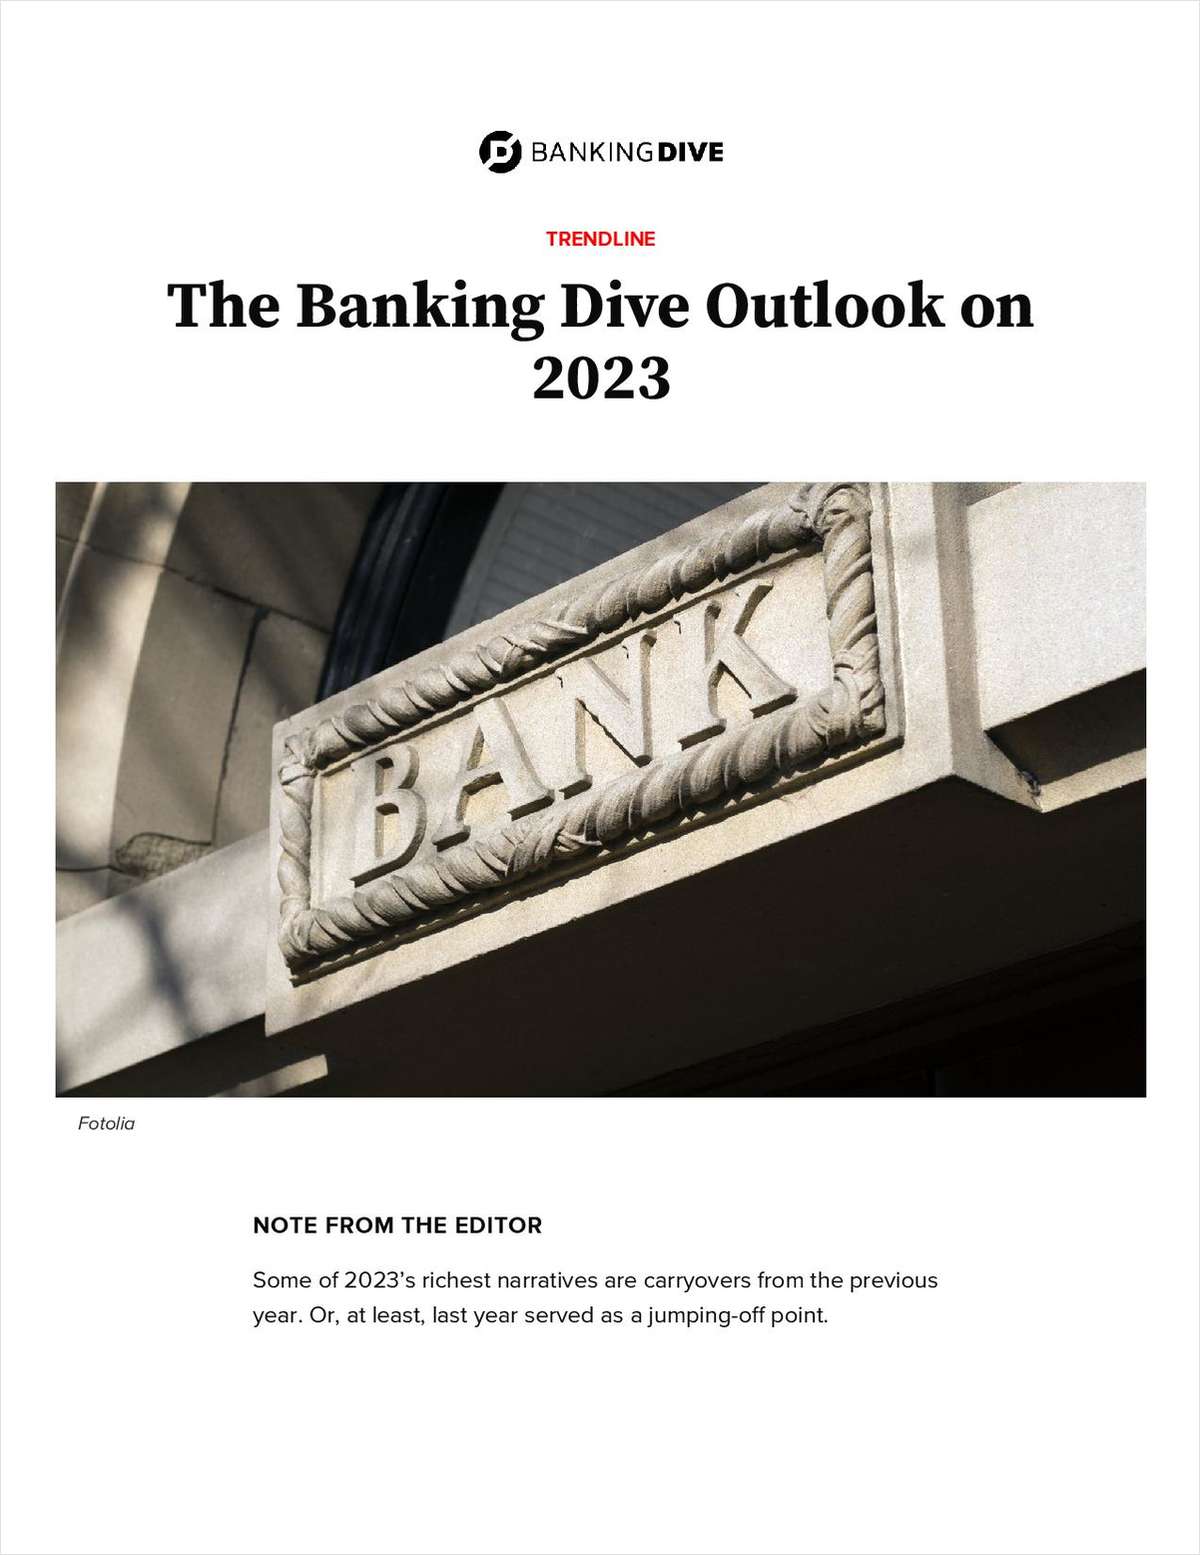 The Banking Dive Outlook on 2023